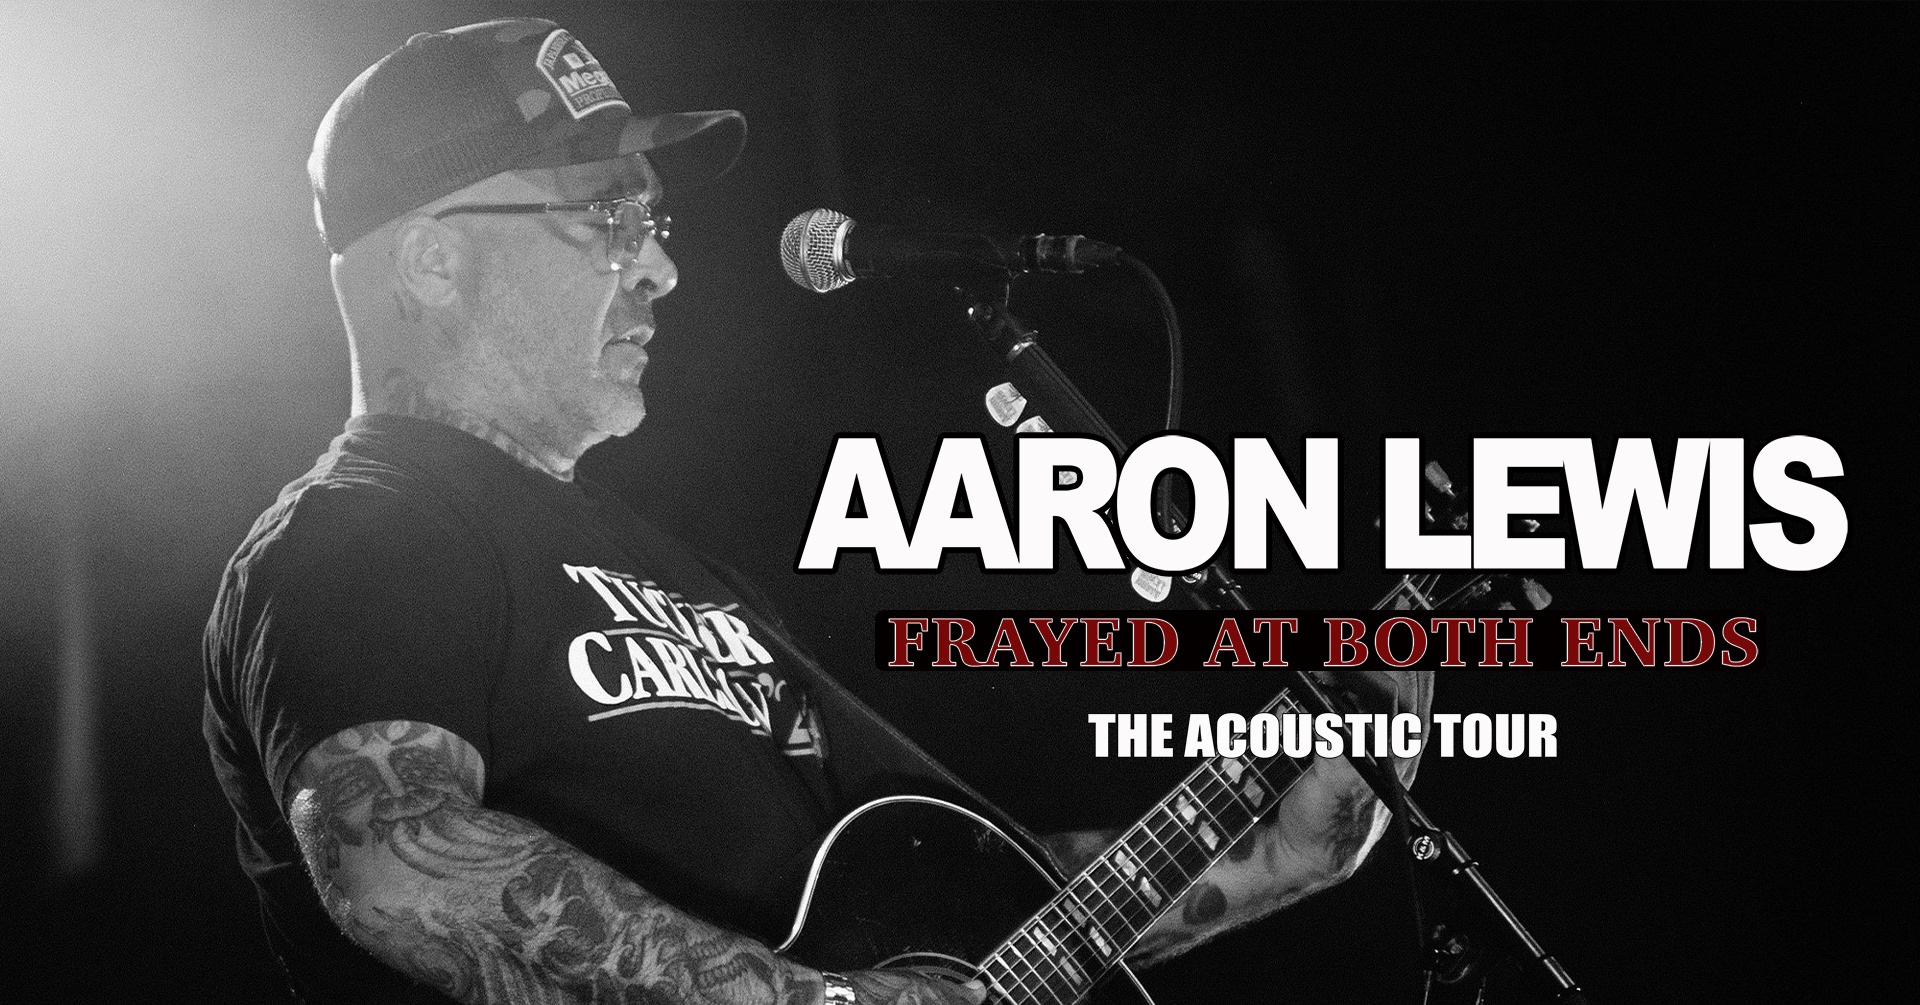 Aaron Lewis: Frayed At Both Ends, The Acoustic Tour